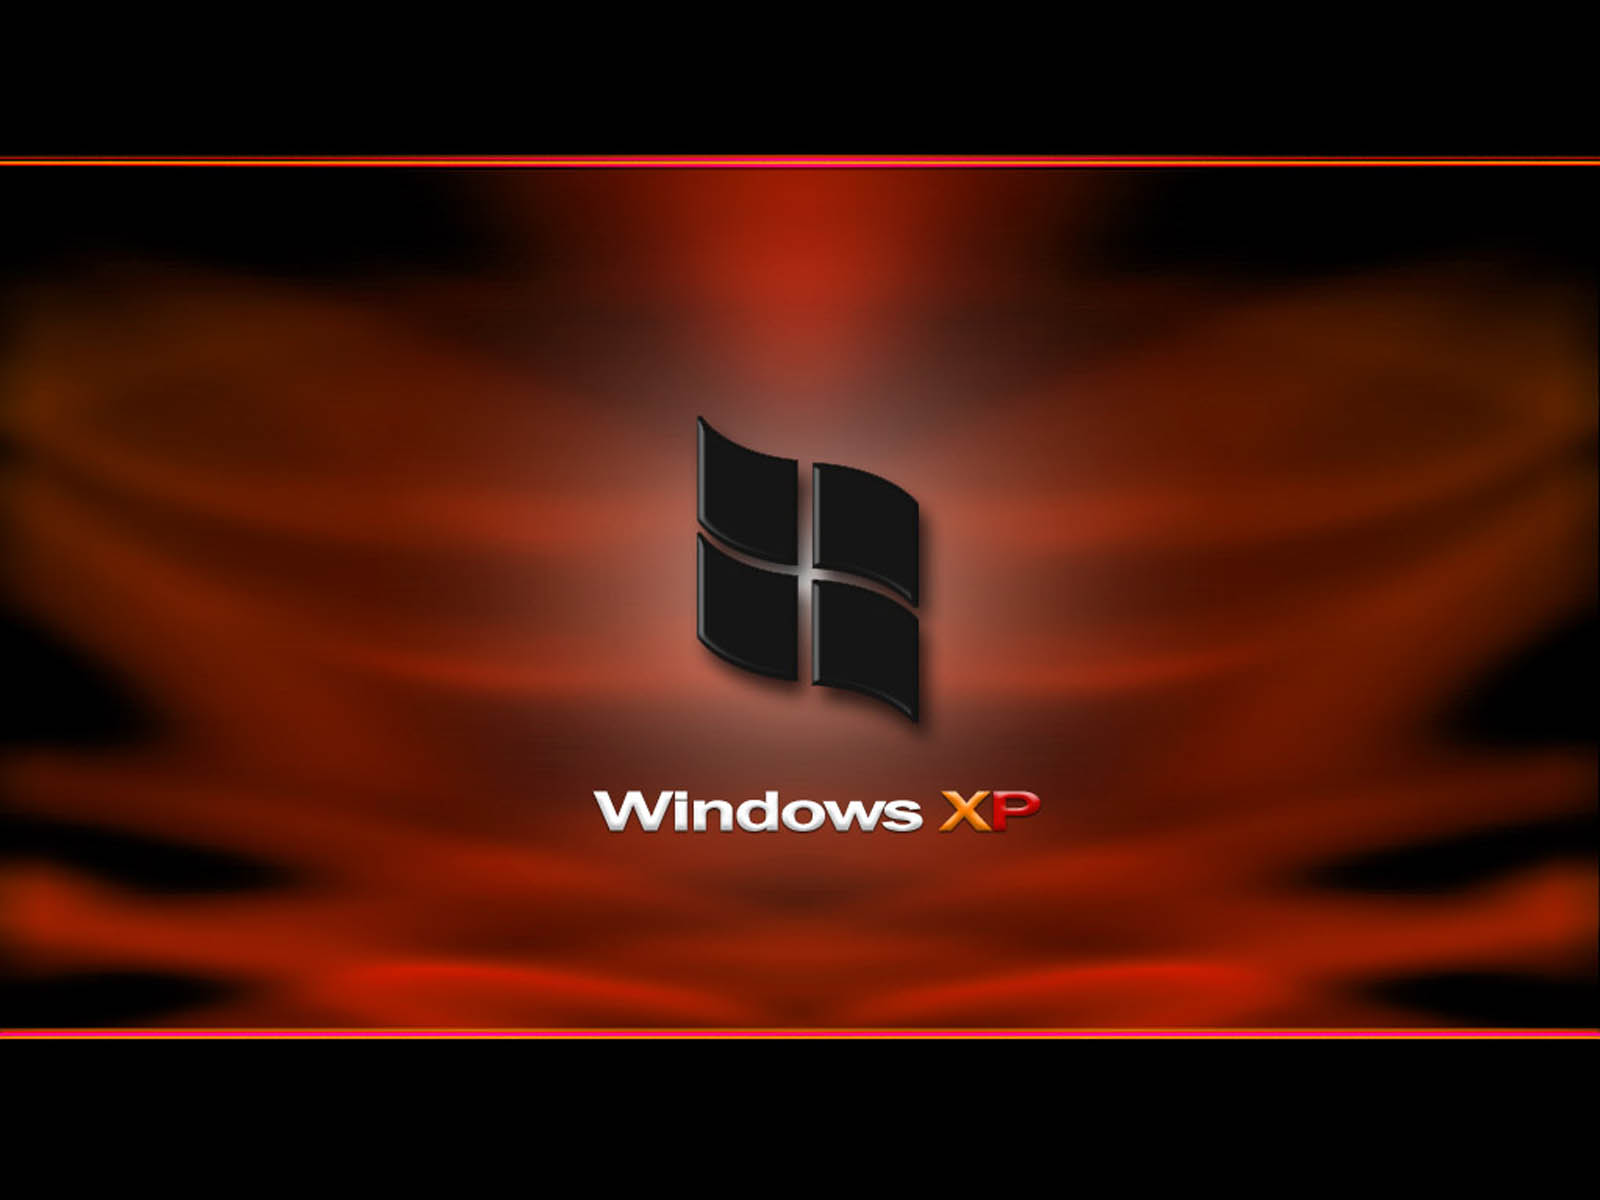 Xp Desktop Wallpaper Image Photos Pictures And Background For